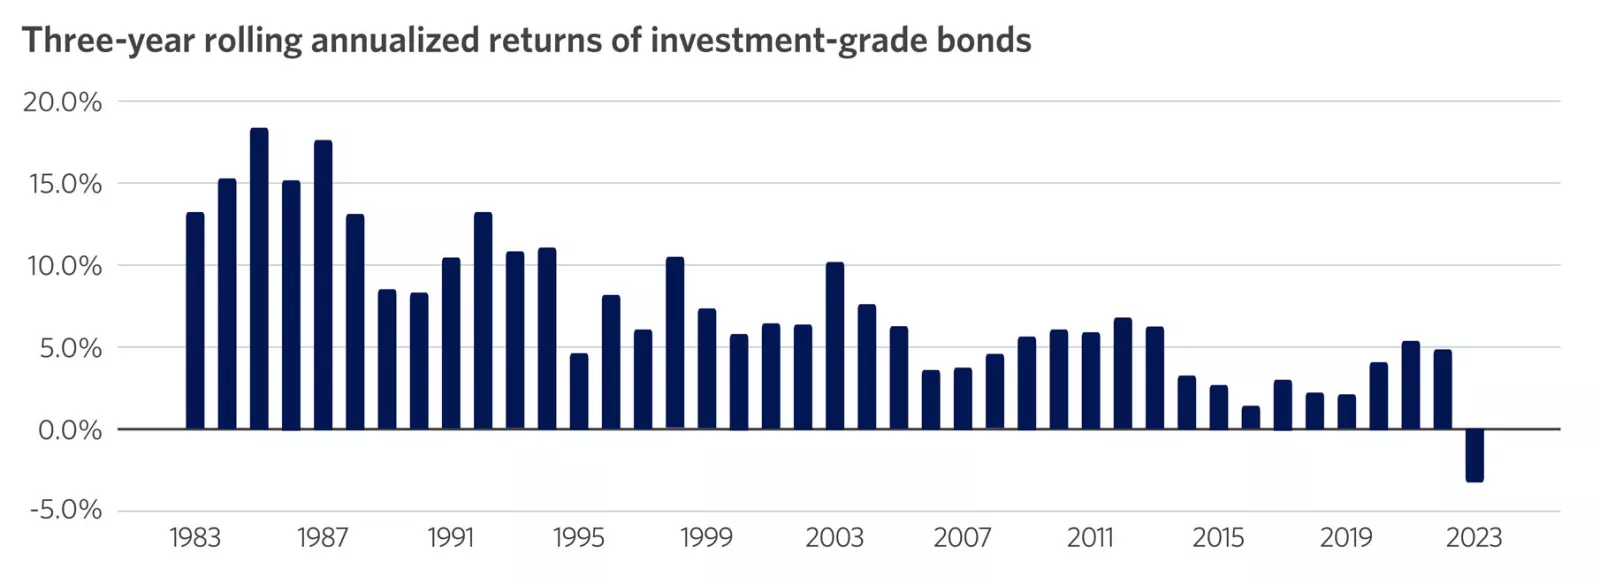 The graph shows that investment grade bonds have not suffered losses over any three-year period since 1976. 